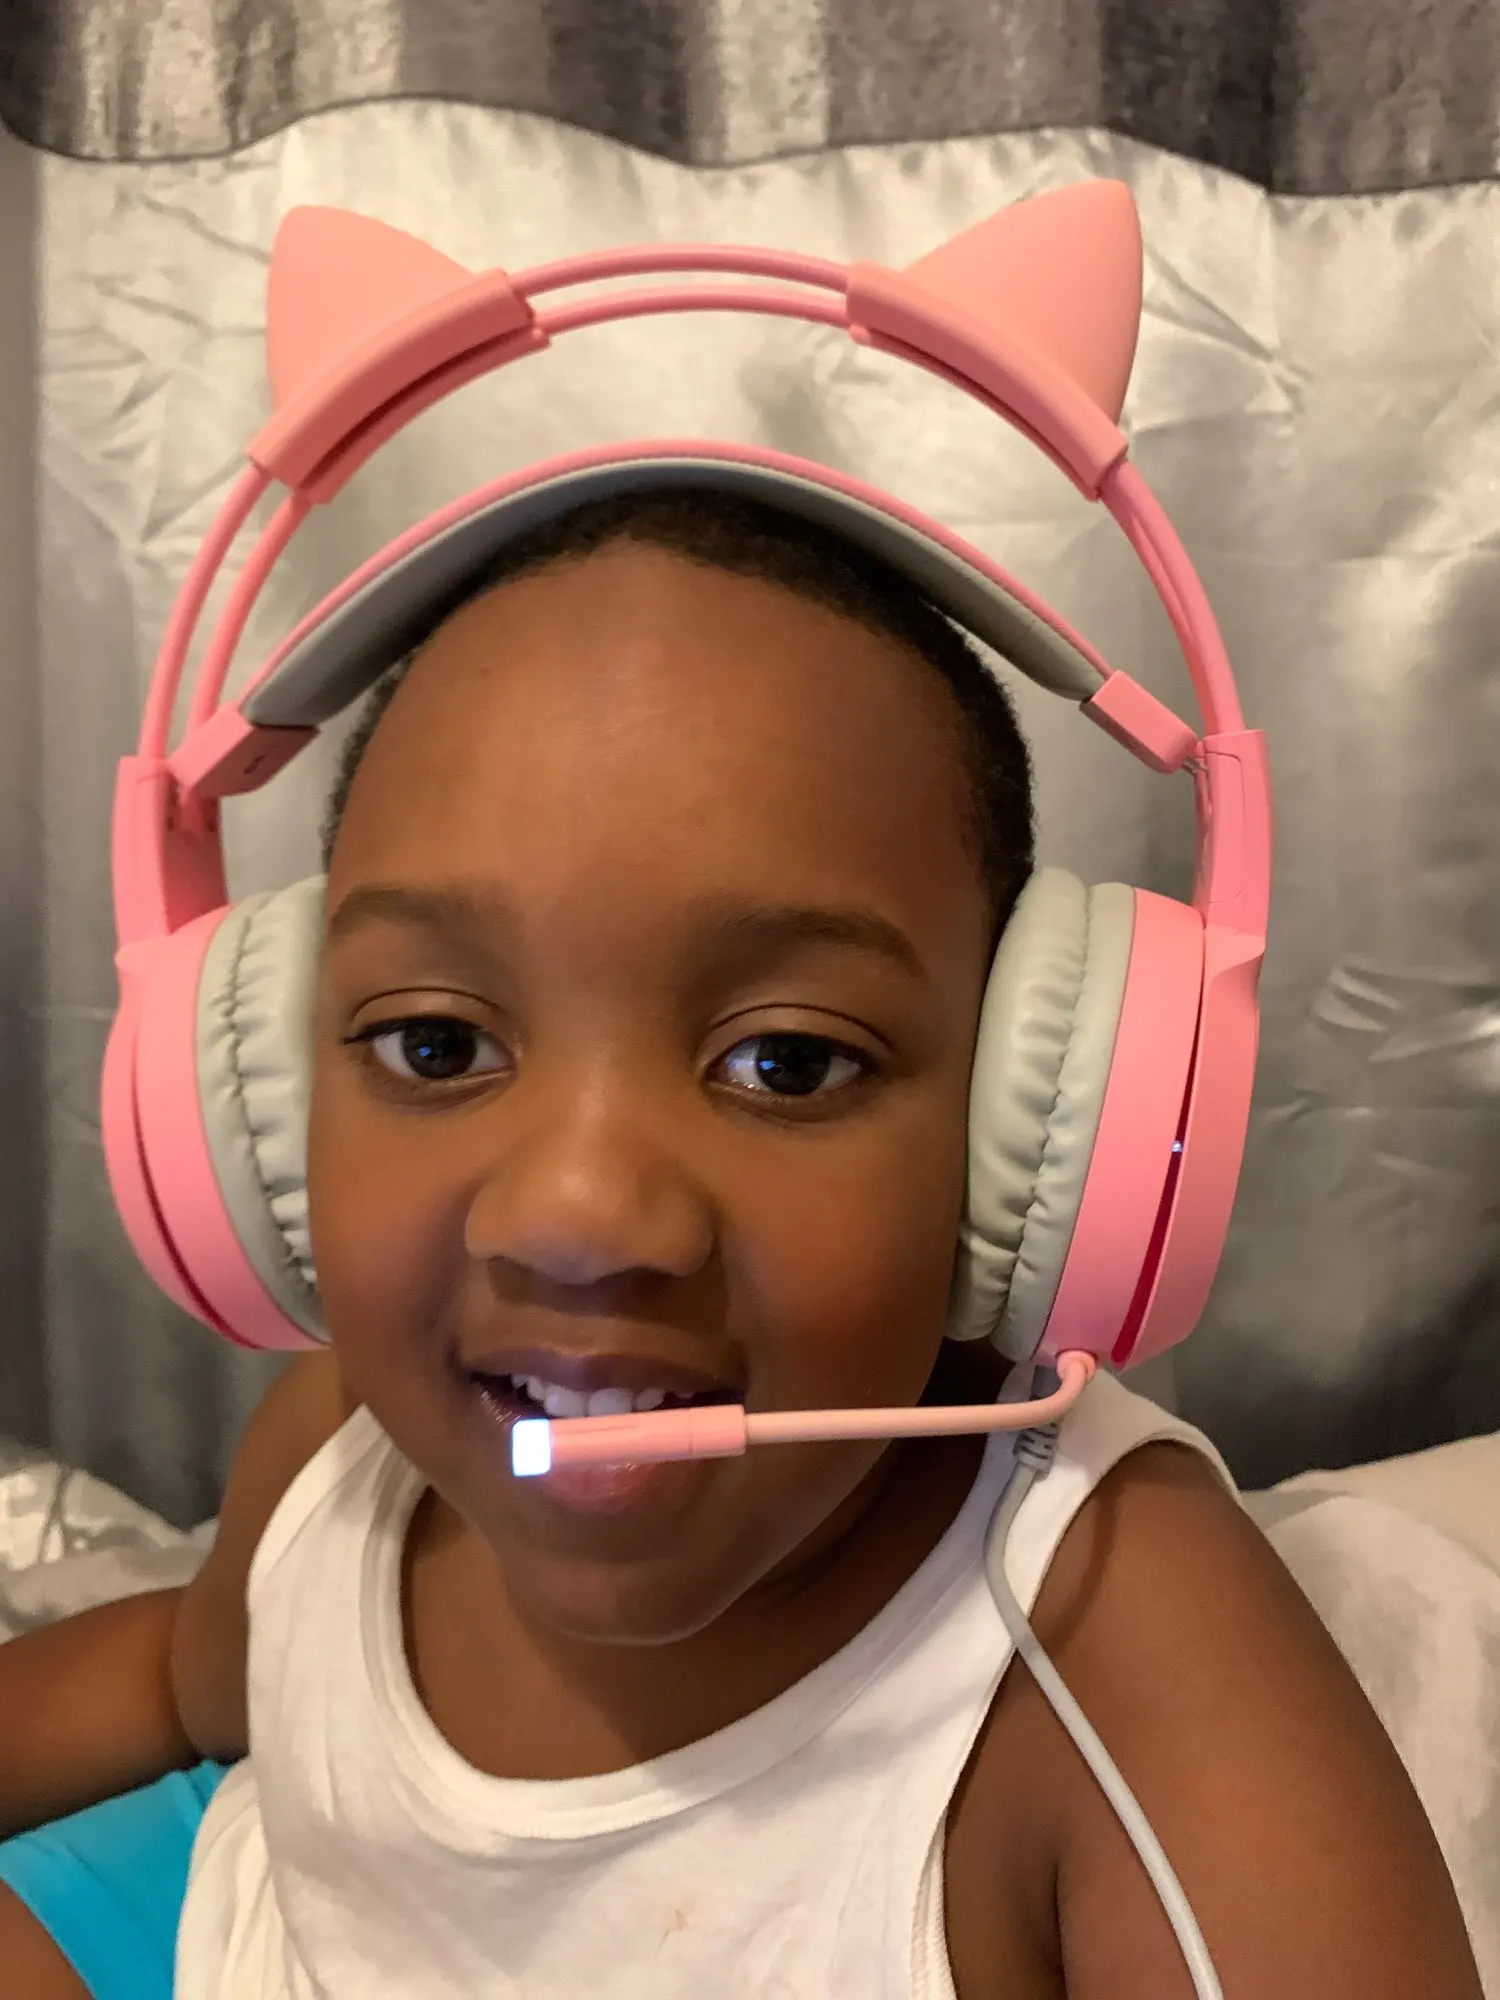 Make your gaming set-up go from nay to yay and get your hands on this Cat Ear Pink Headset today!lolithecat.com